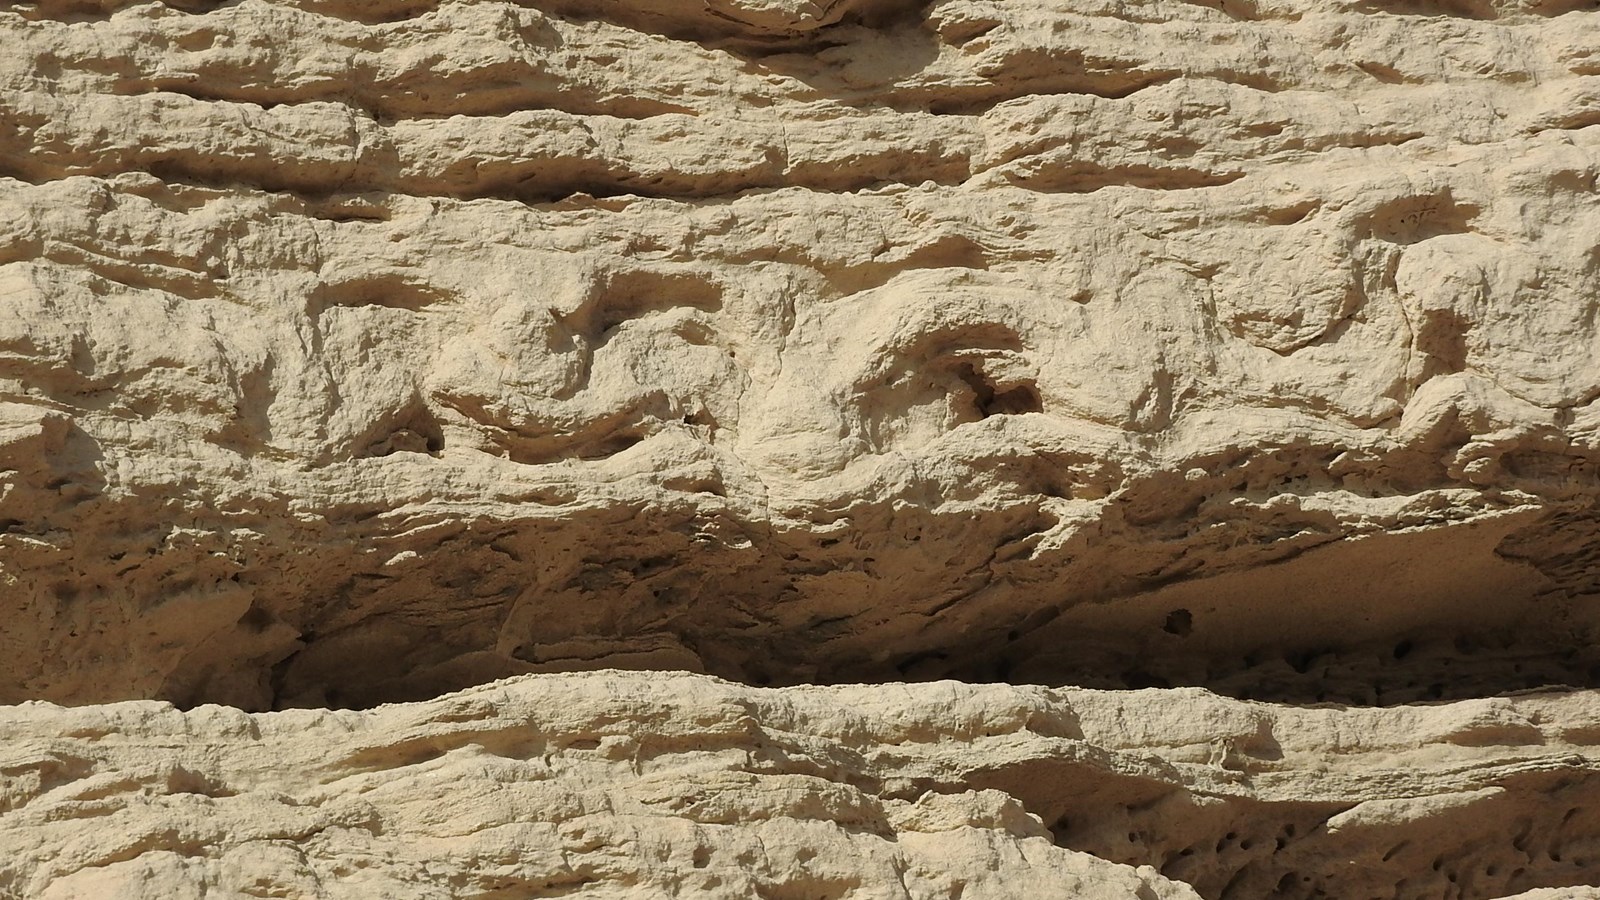 Layers of sandstone are seen, some of the layers show concave-up deformations. 